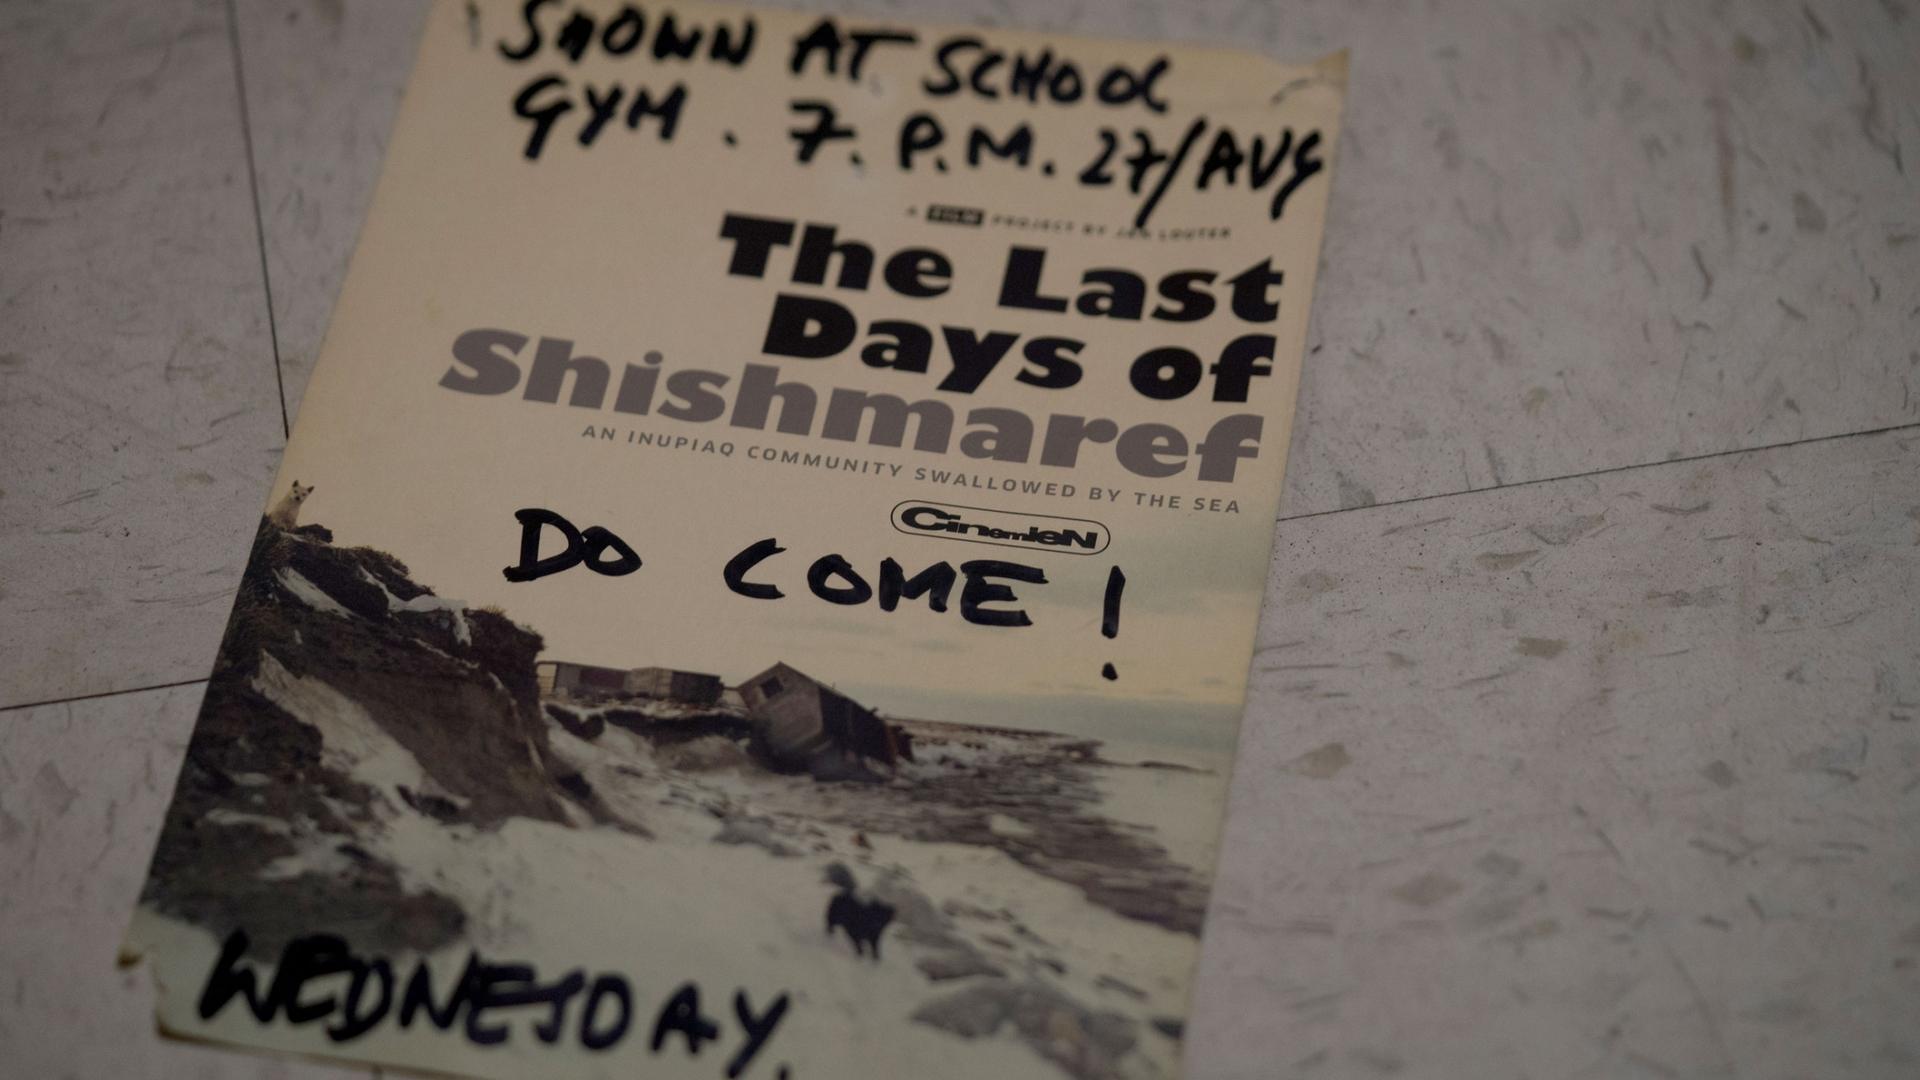 A flyer says "The Last Days of Shishmaref" and handwriting on it says a time and date and a "Do come!"